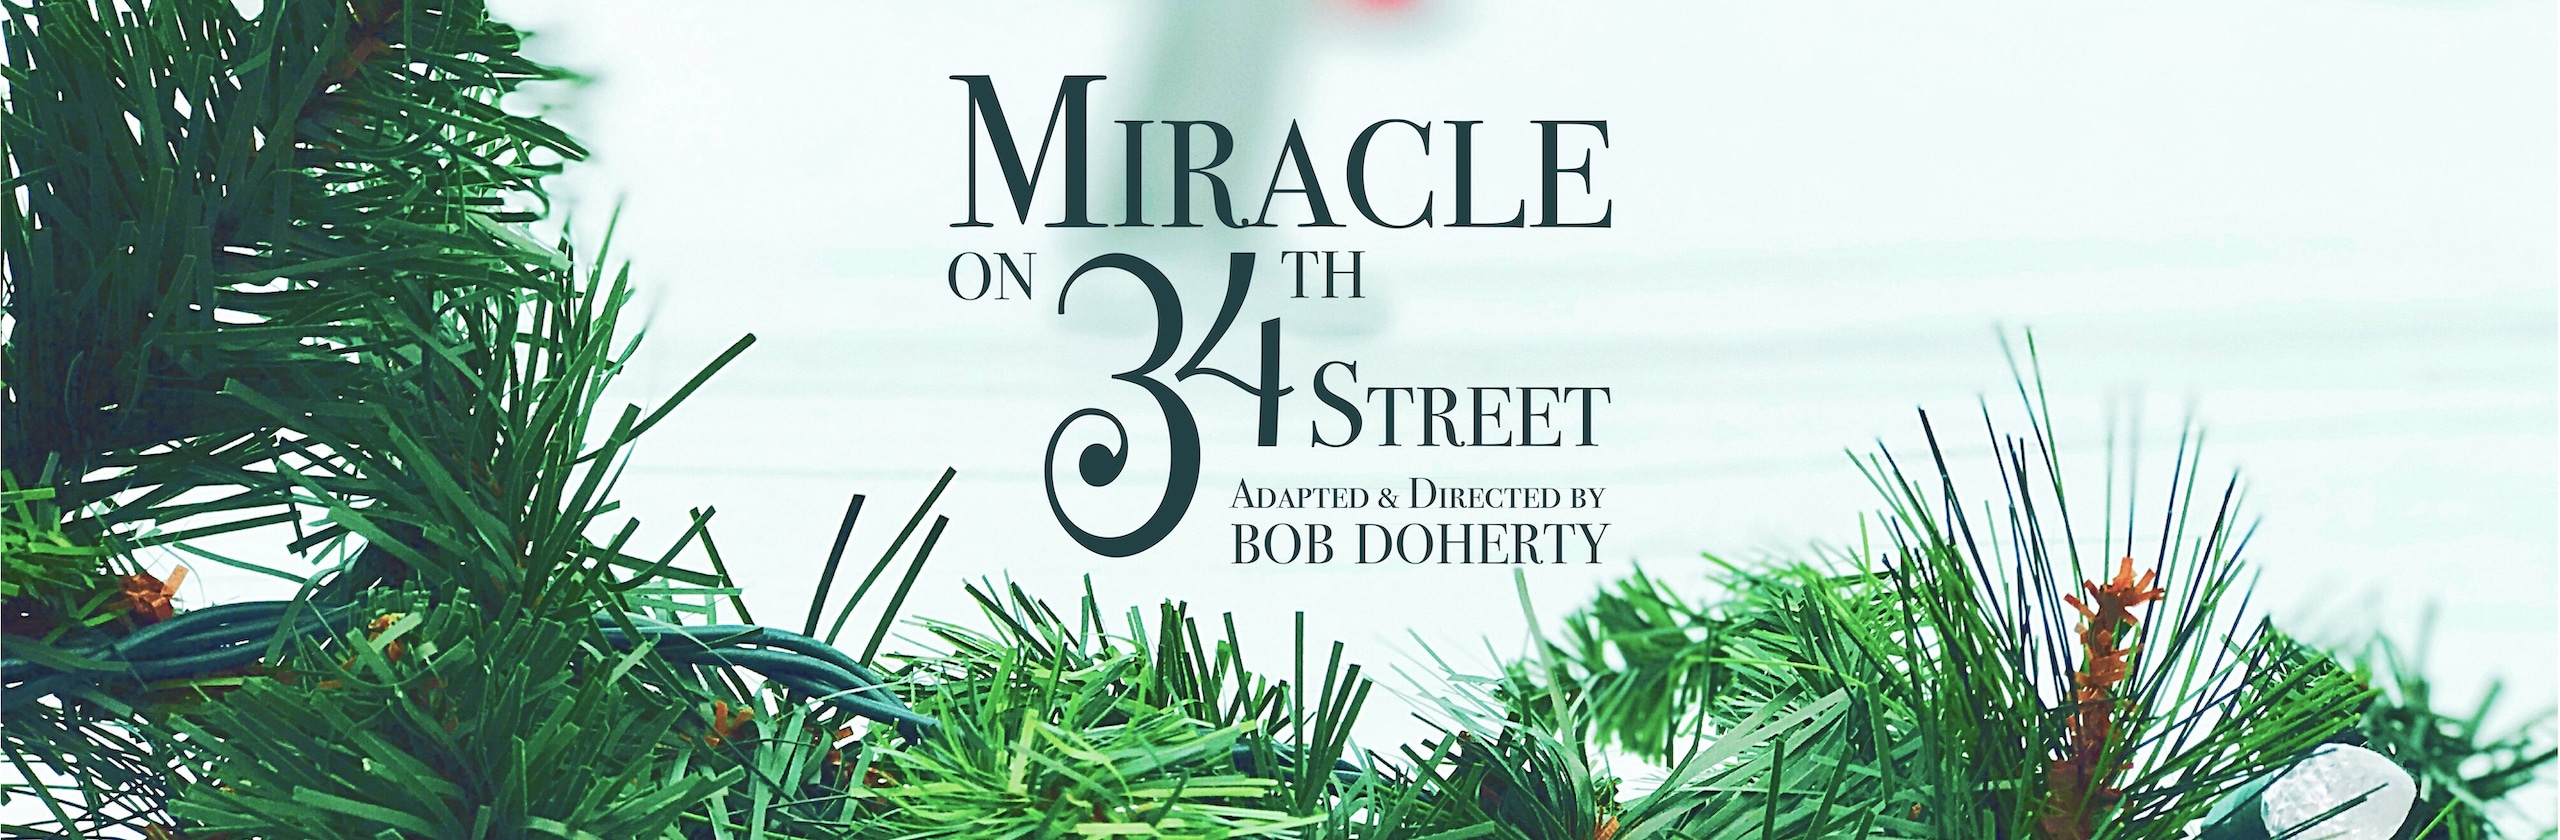 Miracle on 34th Street webslider